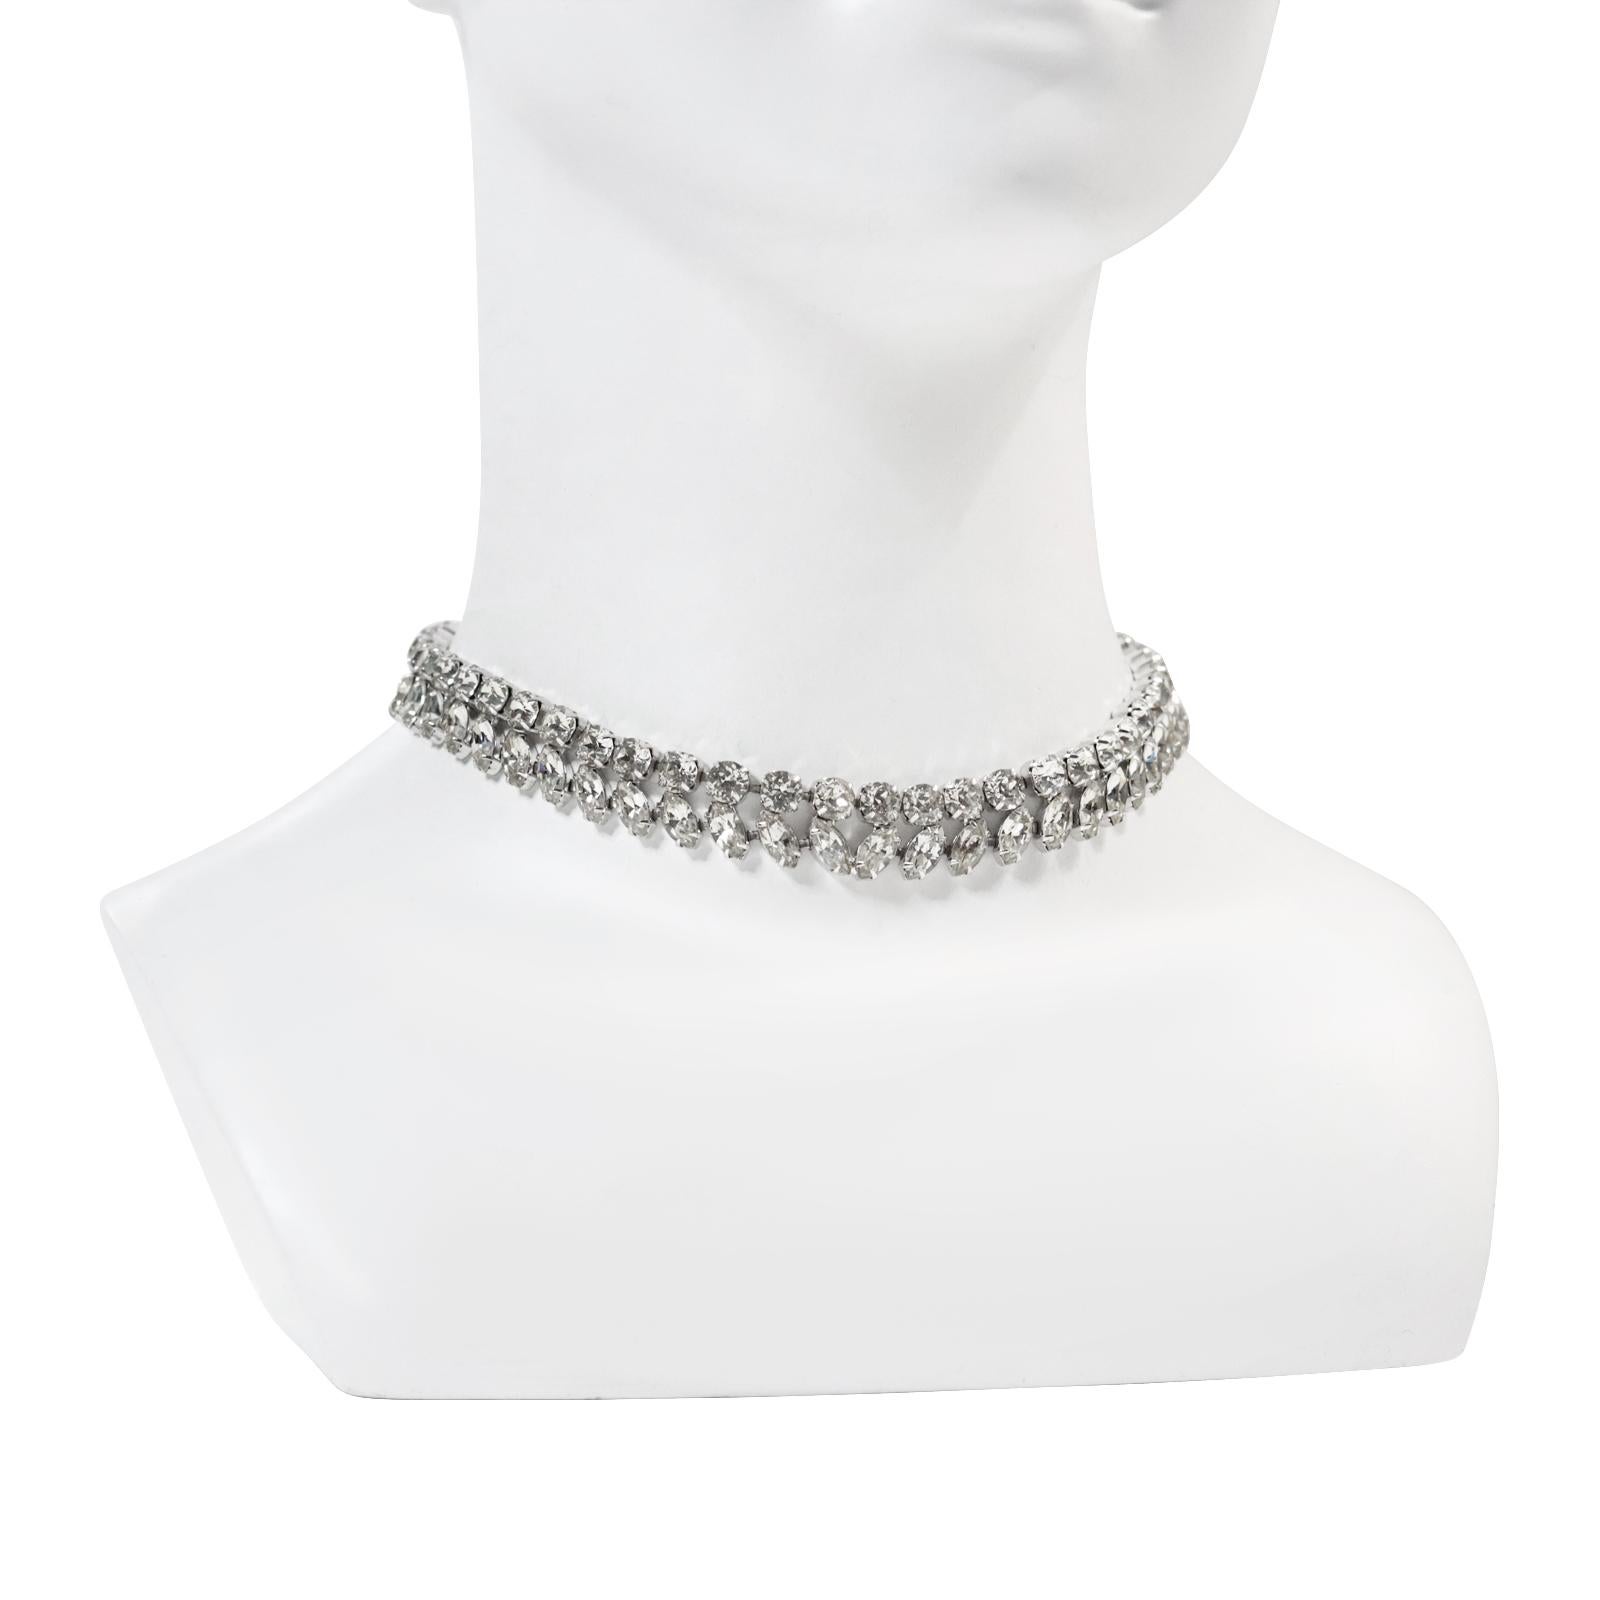 Vintage Diamante Pear and Round Cut Choker Circa 1960s.This is such a beautiful and well made piece of jewelry. It is substantial and well made and looks like fine jewelry. There is a long line at the top of rounds and then below it is a line of